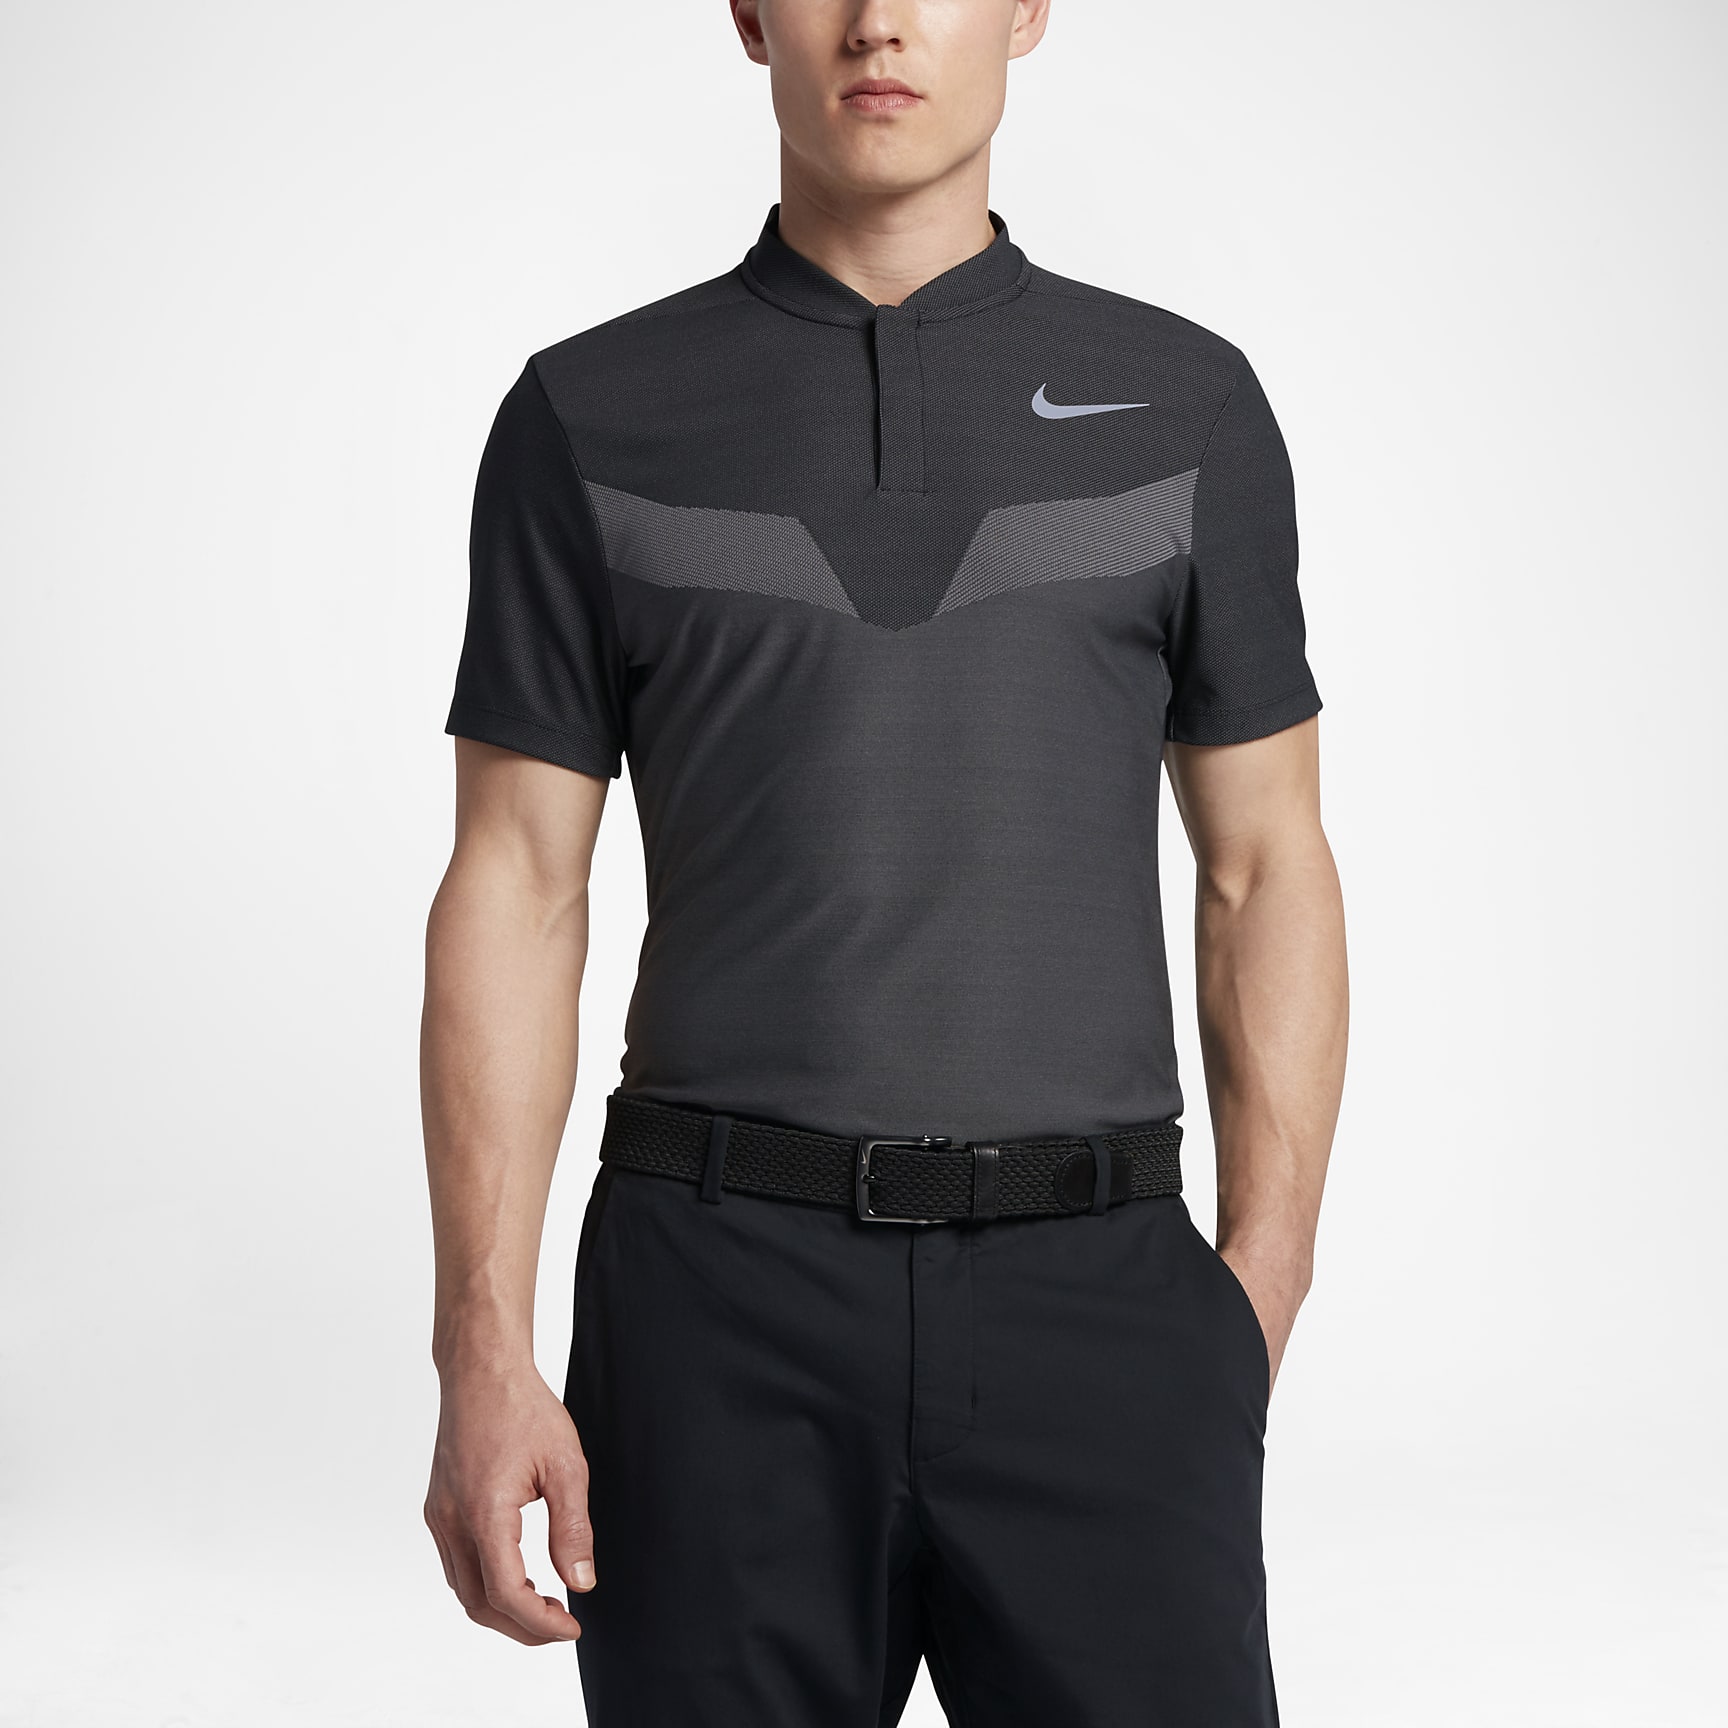 Nike Zonal Cooling Men's Slim Fit Golf Polo. Nike SG